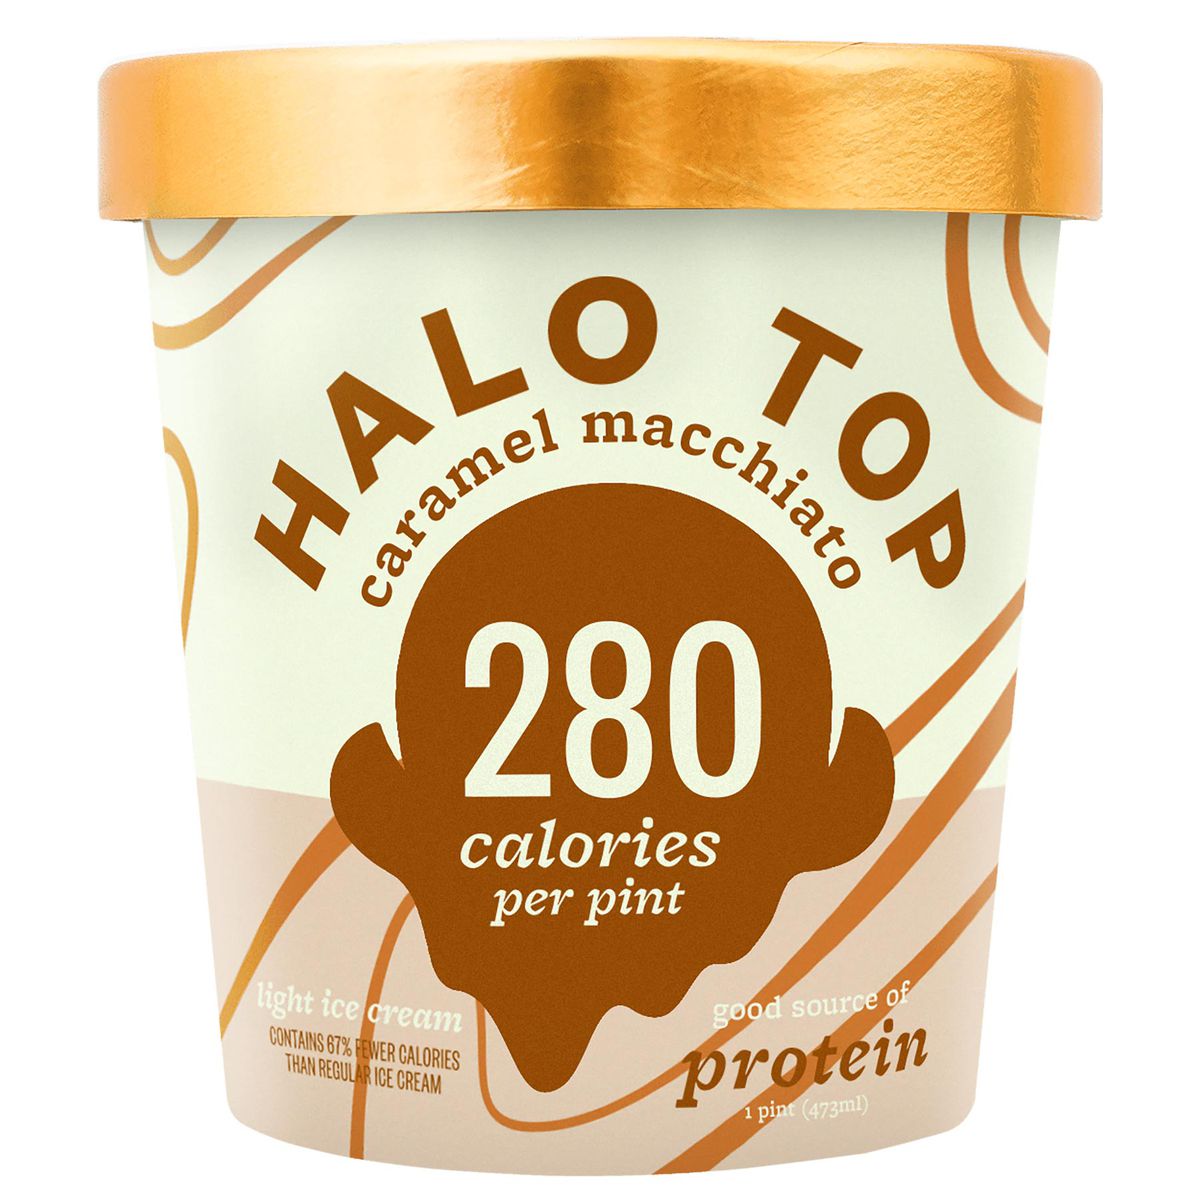 We Tasted (and Graded) Every Halo Top Flavor Available